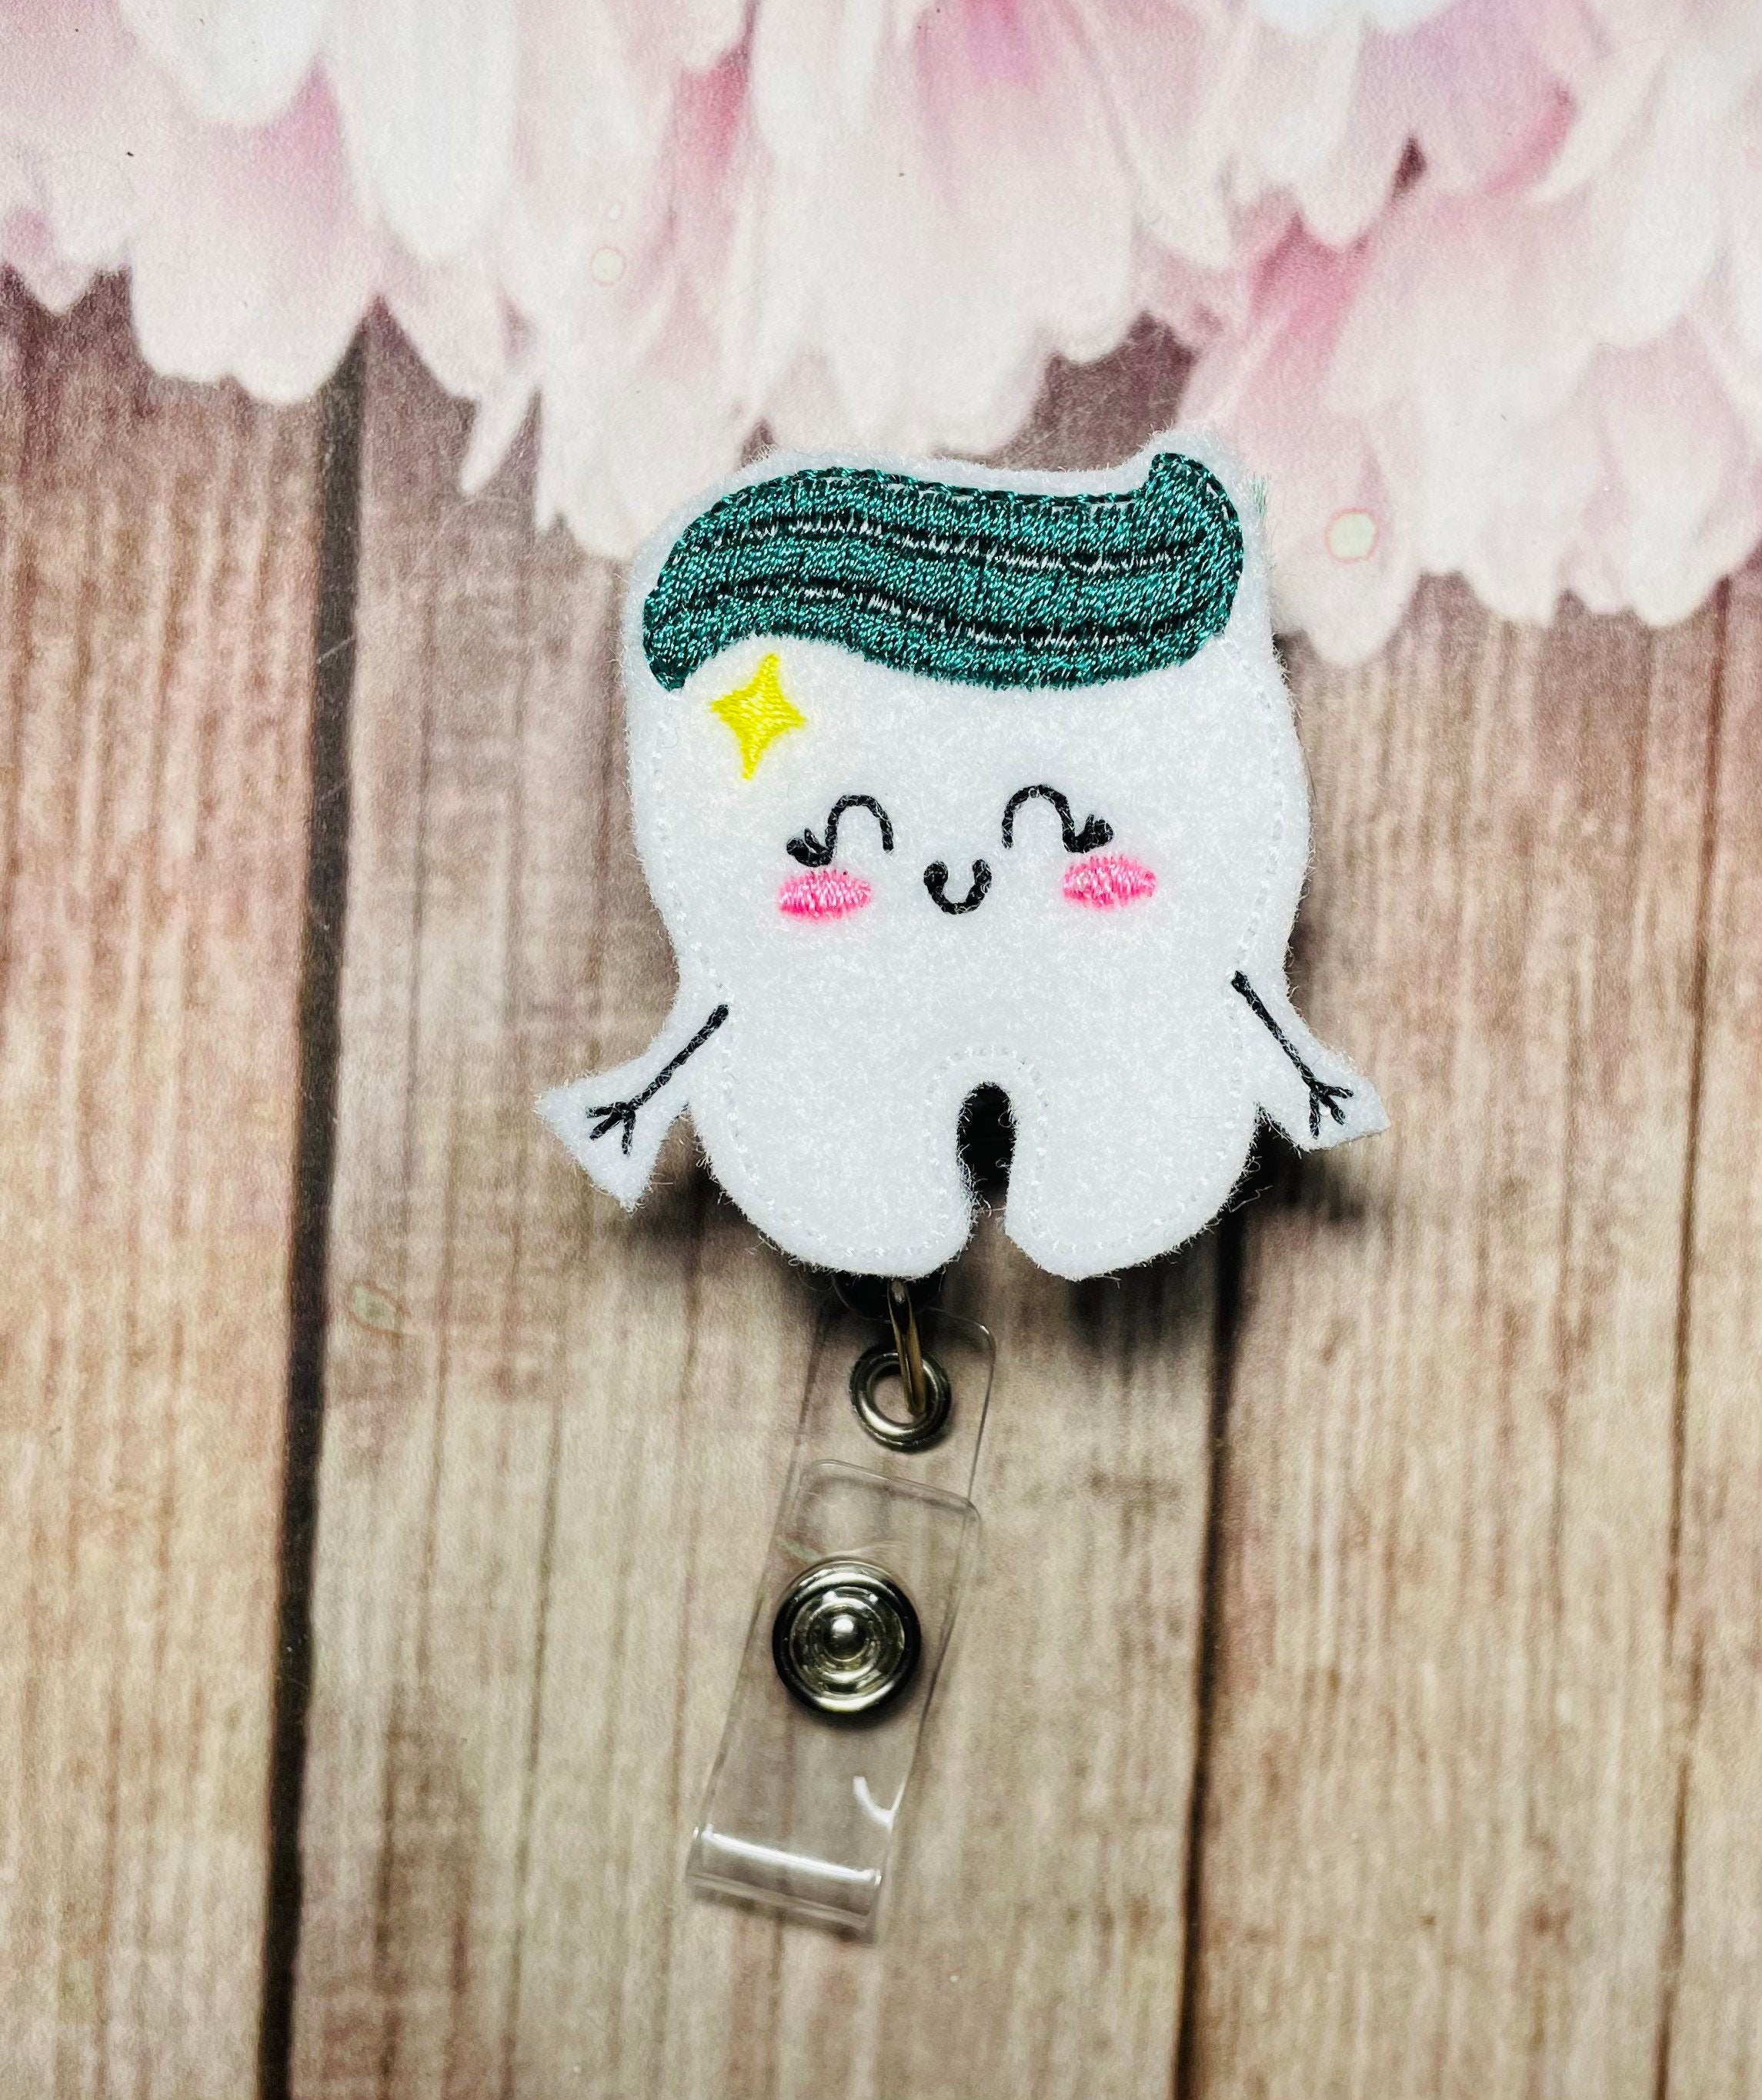 Interchangeable Badge Reel Cute Tooth for Dentist, Dental